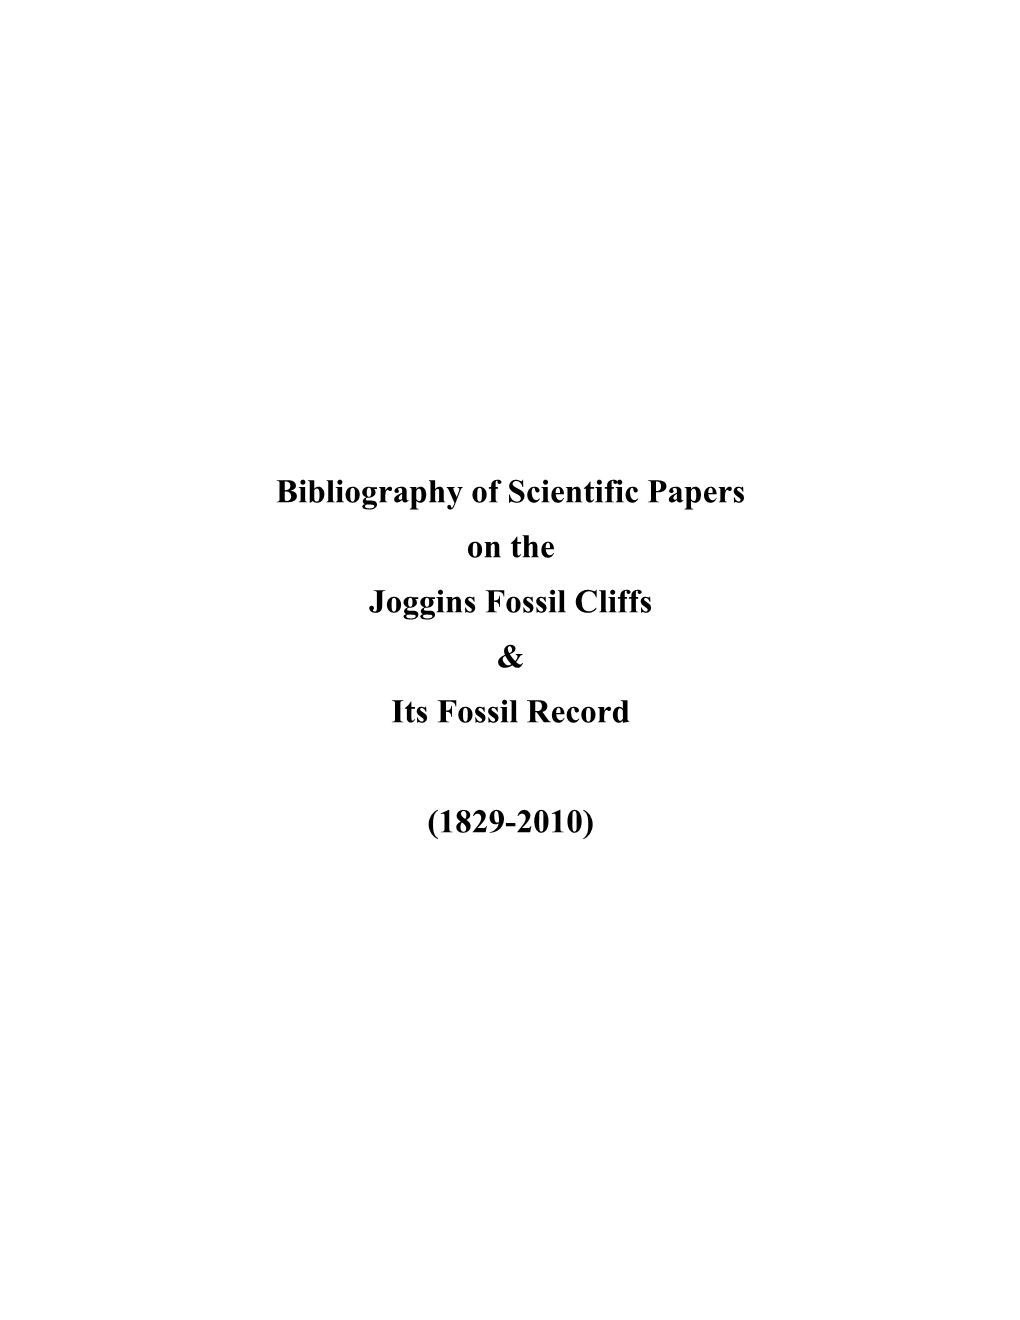 Bibliography of Scientific Papers on the Joggins Fossil Cliffs & Its Fossil